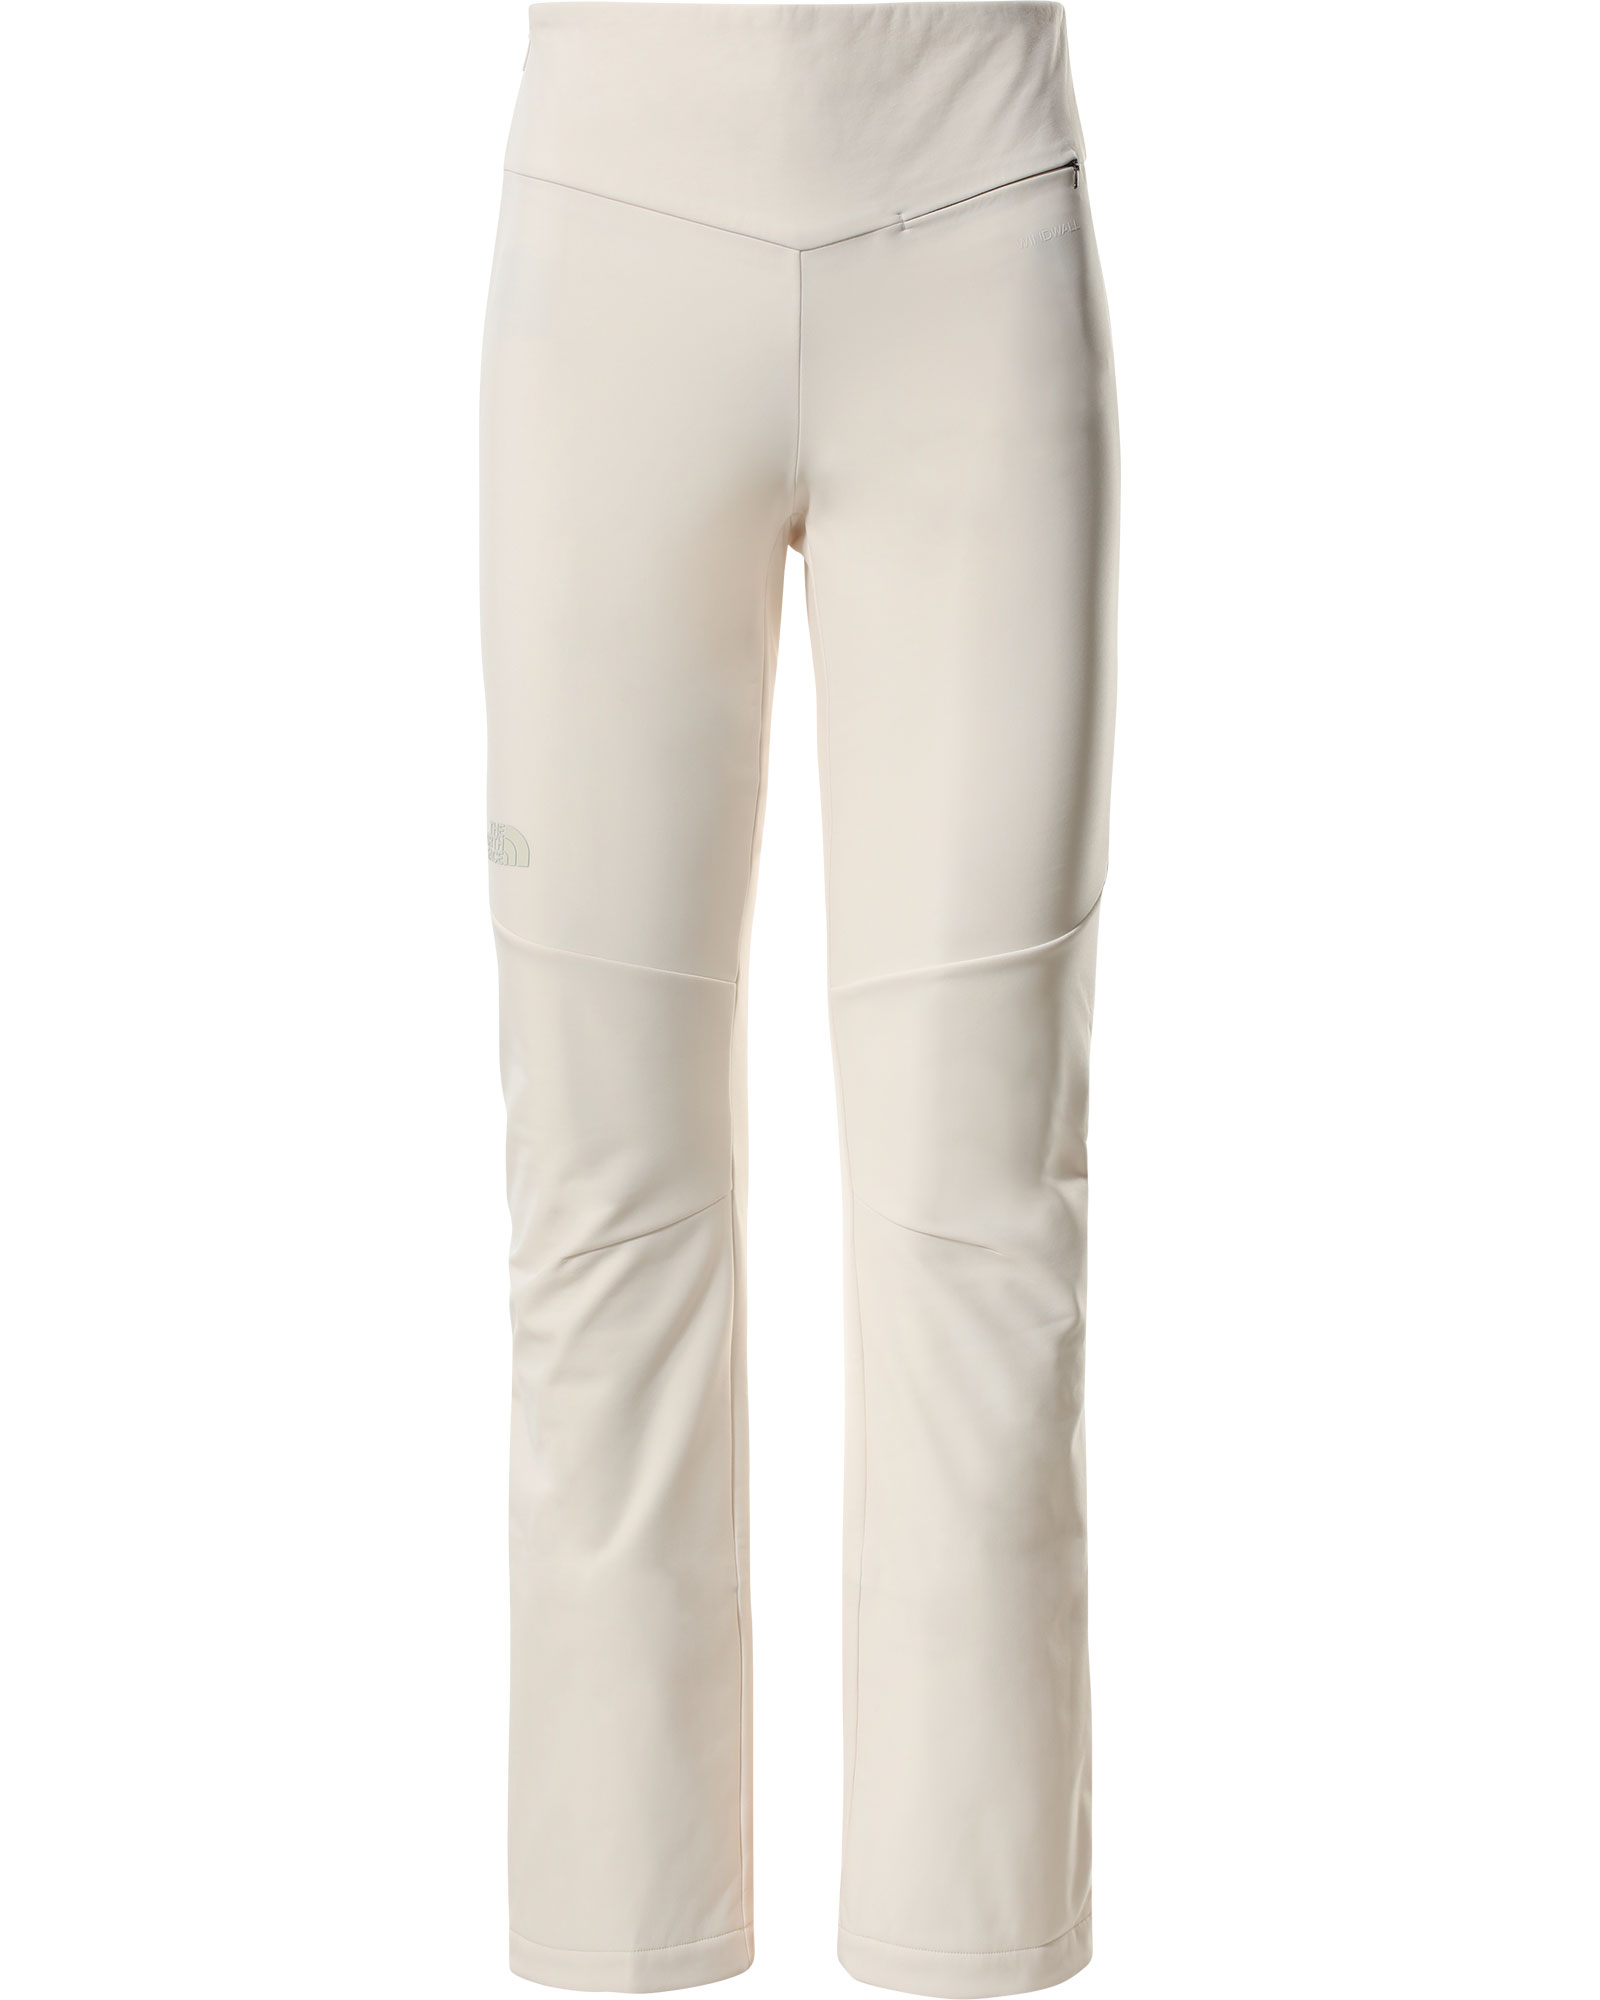 The North Face Snoga Stretch Women’s Pants - Gardenia Whitre 8S